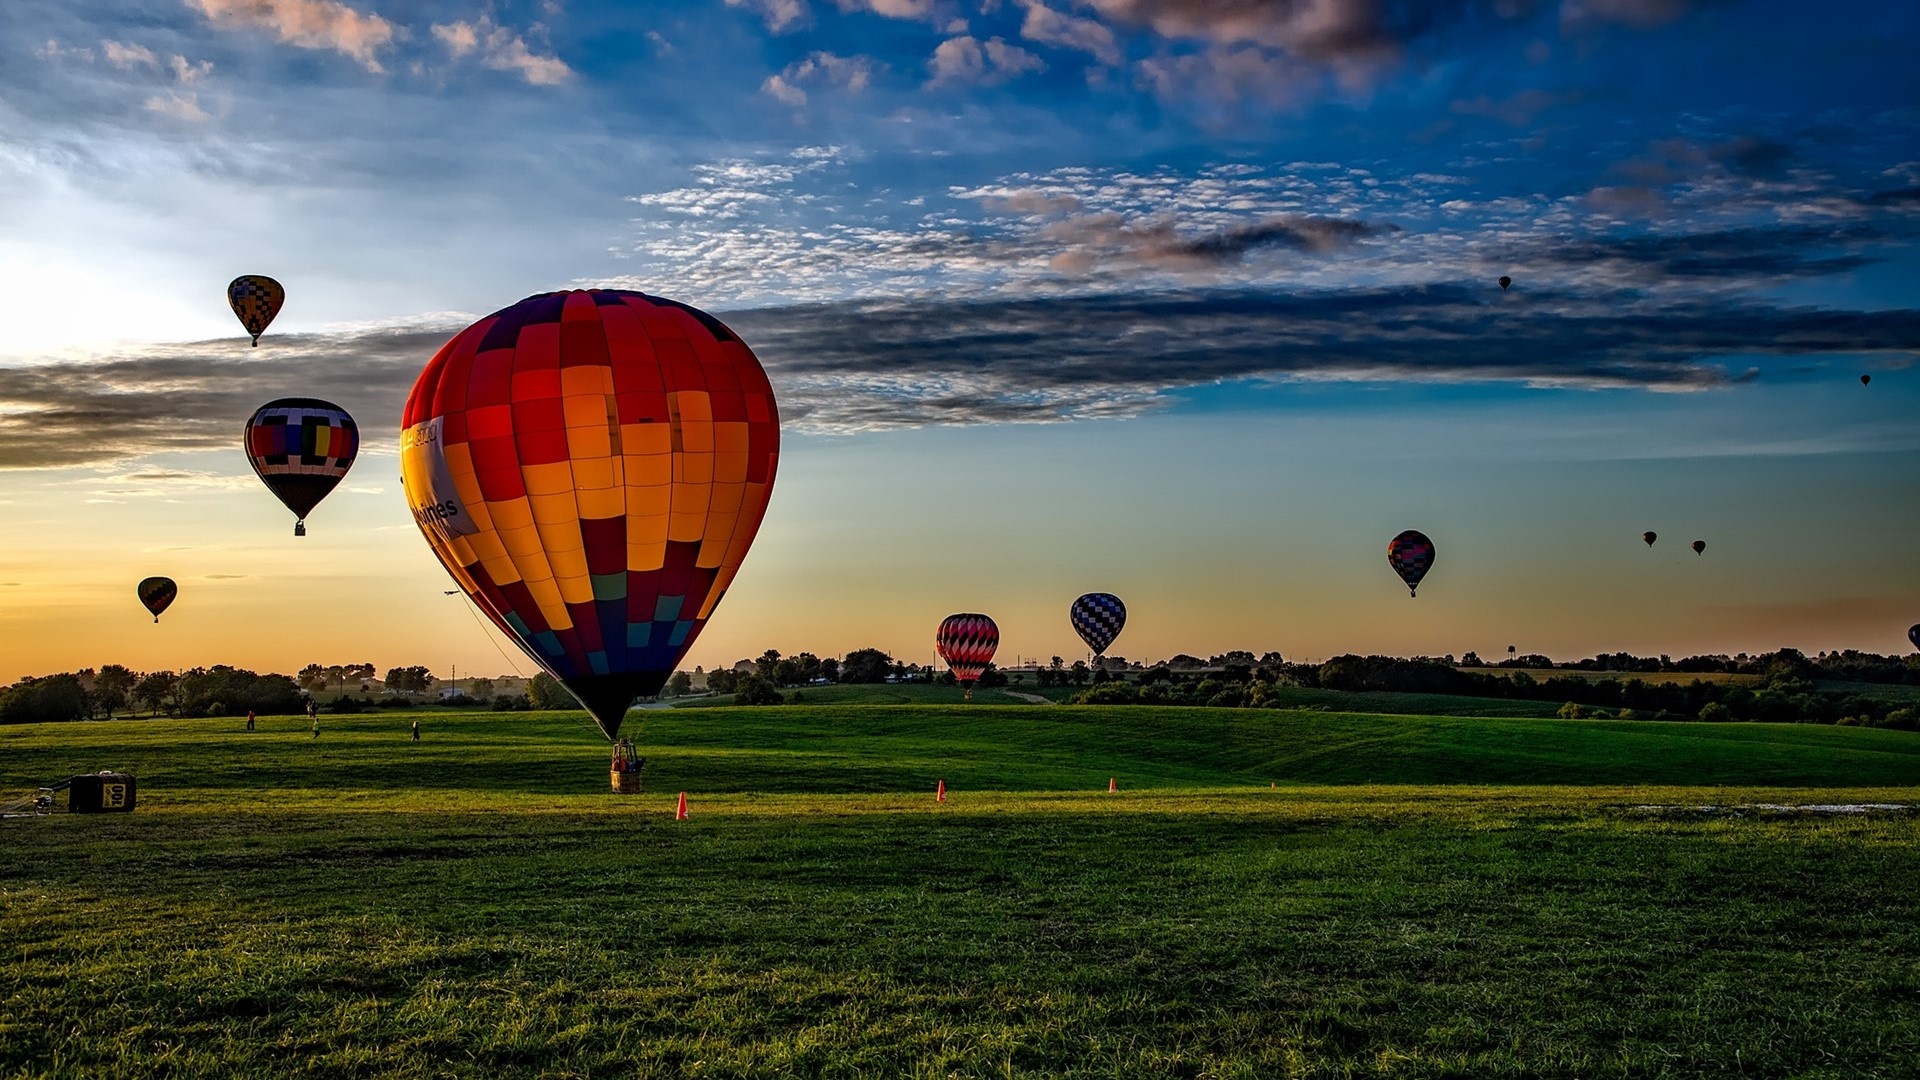 Air Sports: Deccan Airsports, Hot-air balloons taking different altitudes at the sunset. 1920x1080 Full HD Wallpaper.